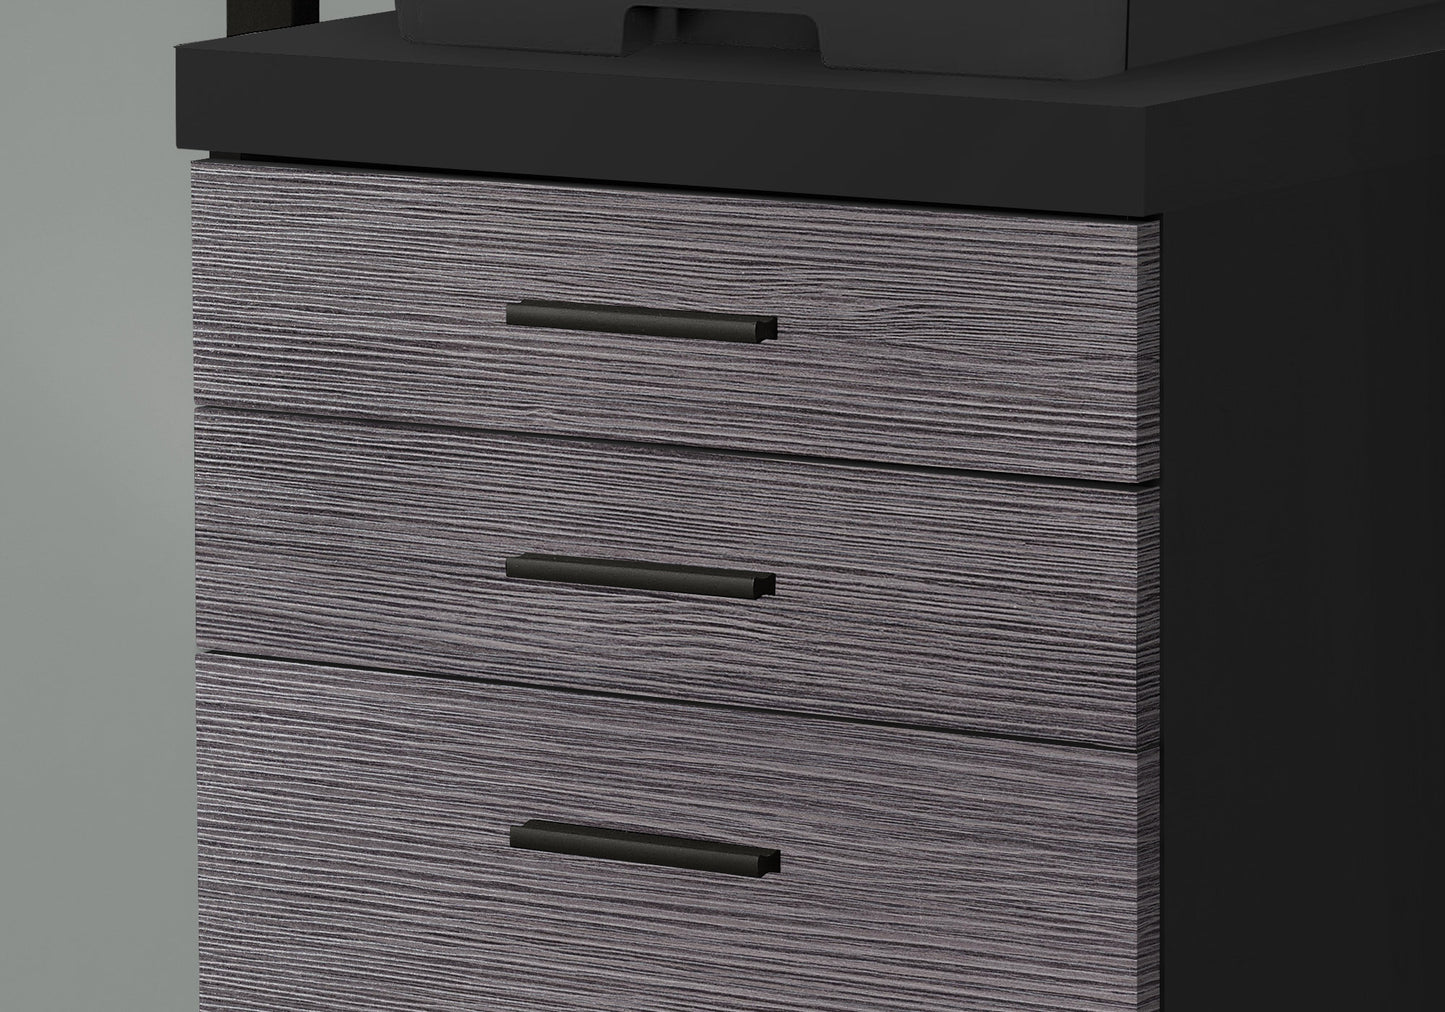 17.75" x 18.25" x 25.25" Black Grey Particle Board 3 Drawers Filing Cabinet